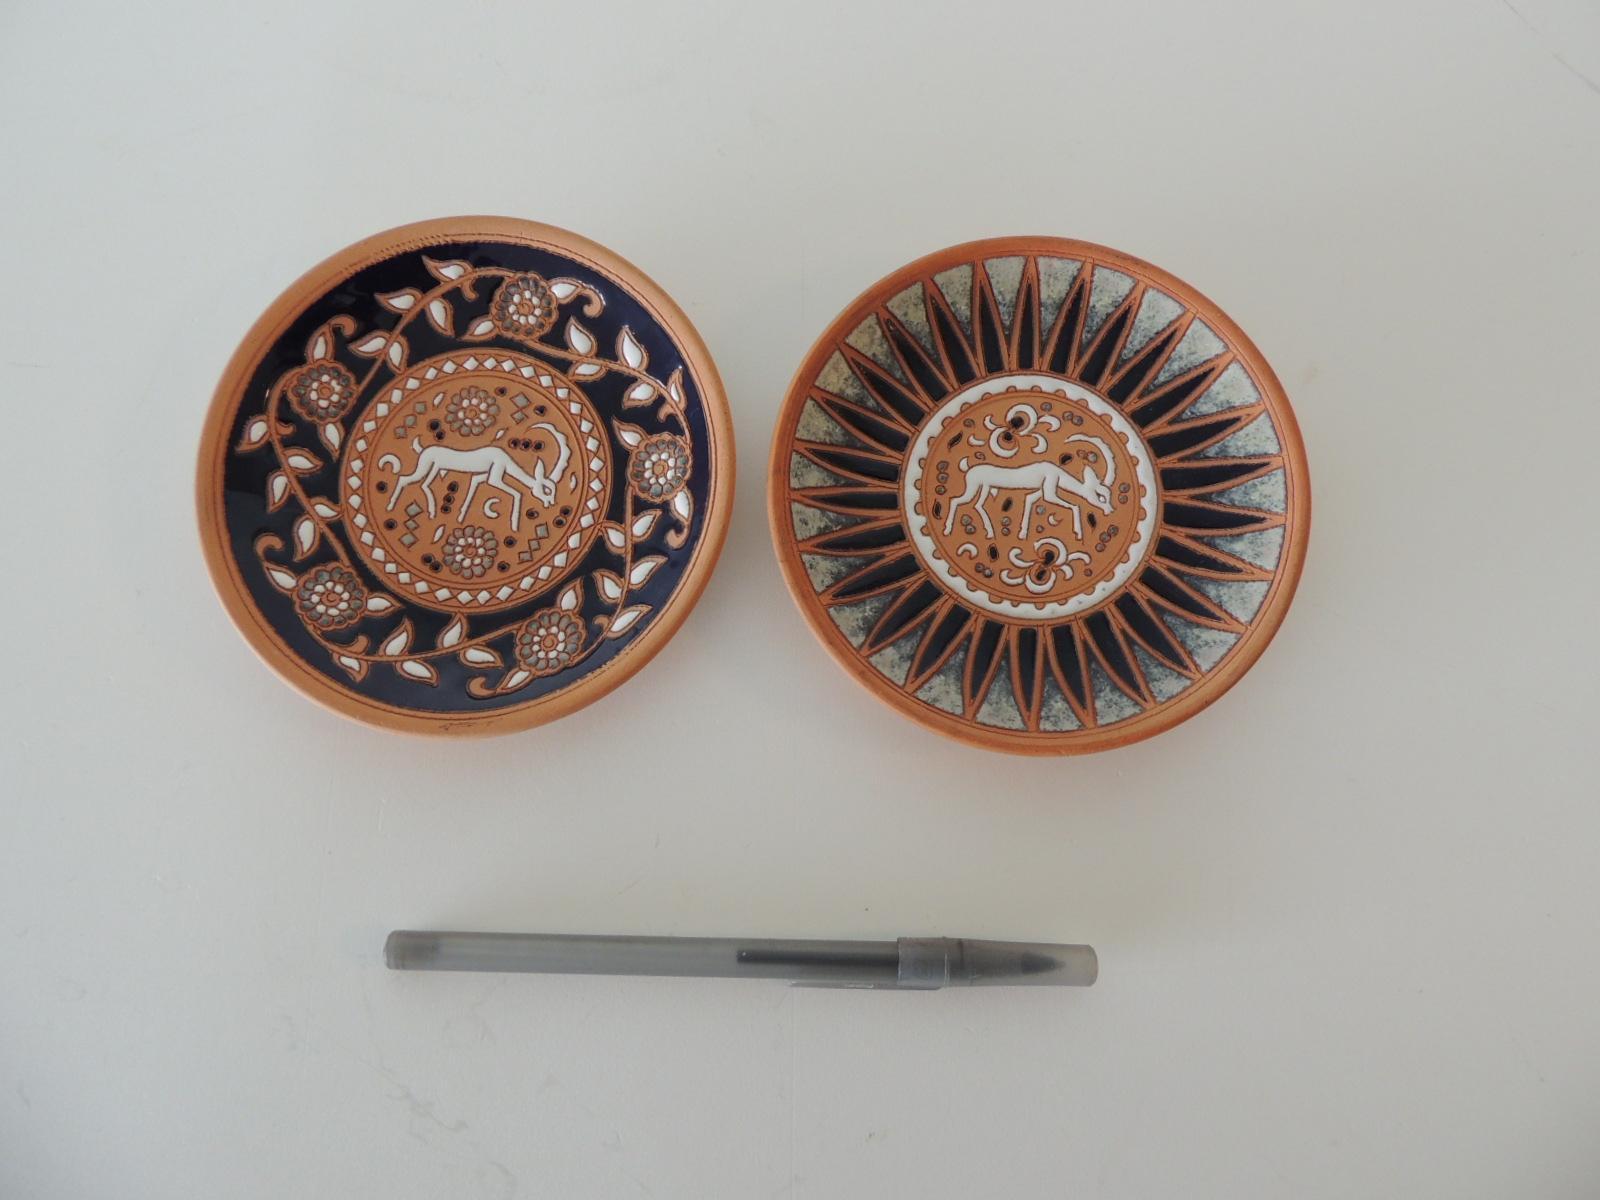 Pair of vintage round Greek small decorative dishes.
Size: 4.5